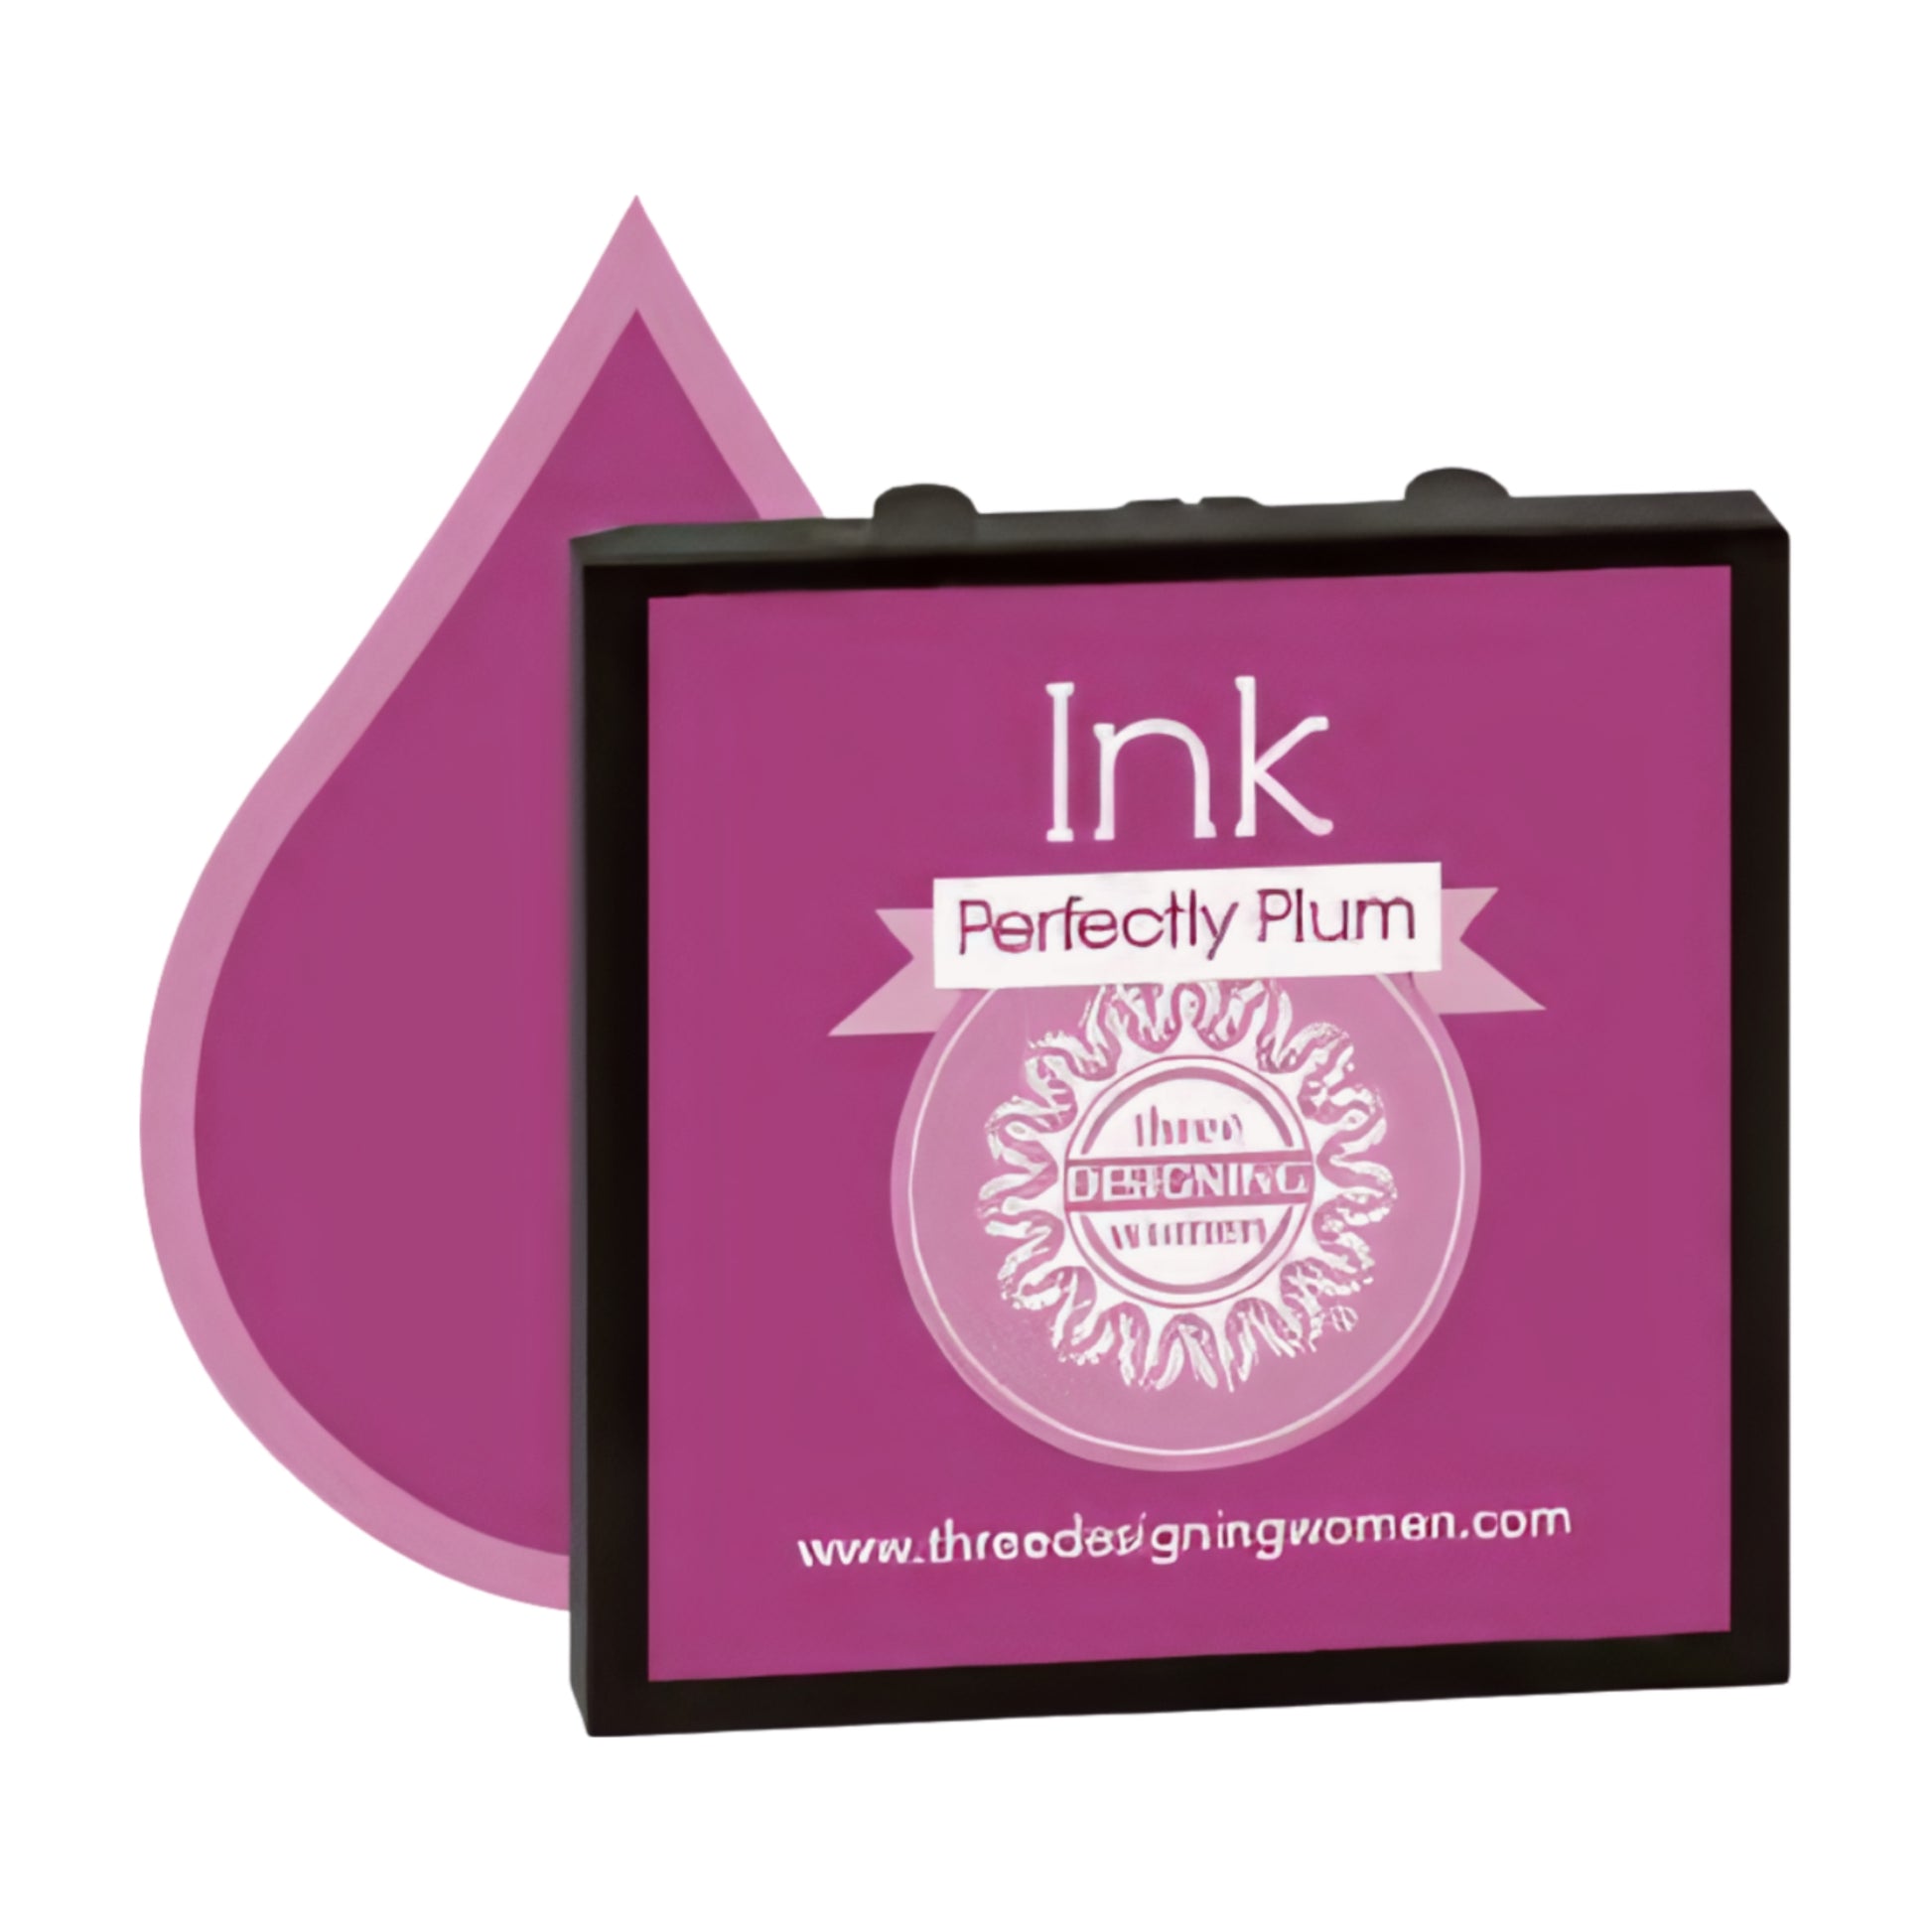 Ink Replacement Cartridge "Perfectly Plum" for Self-Inking Stampers Three Designing Women